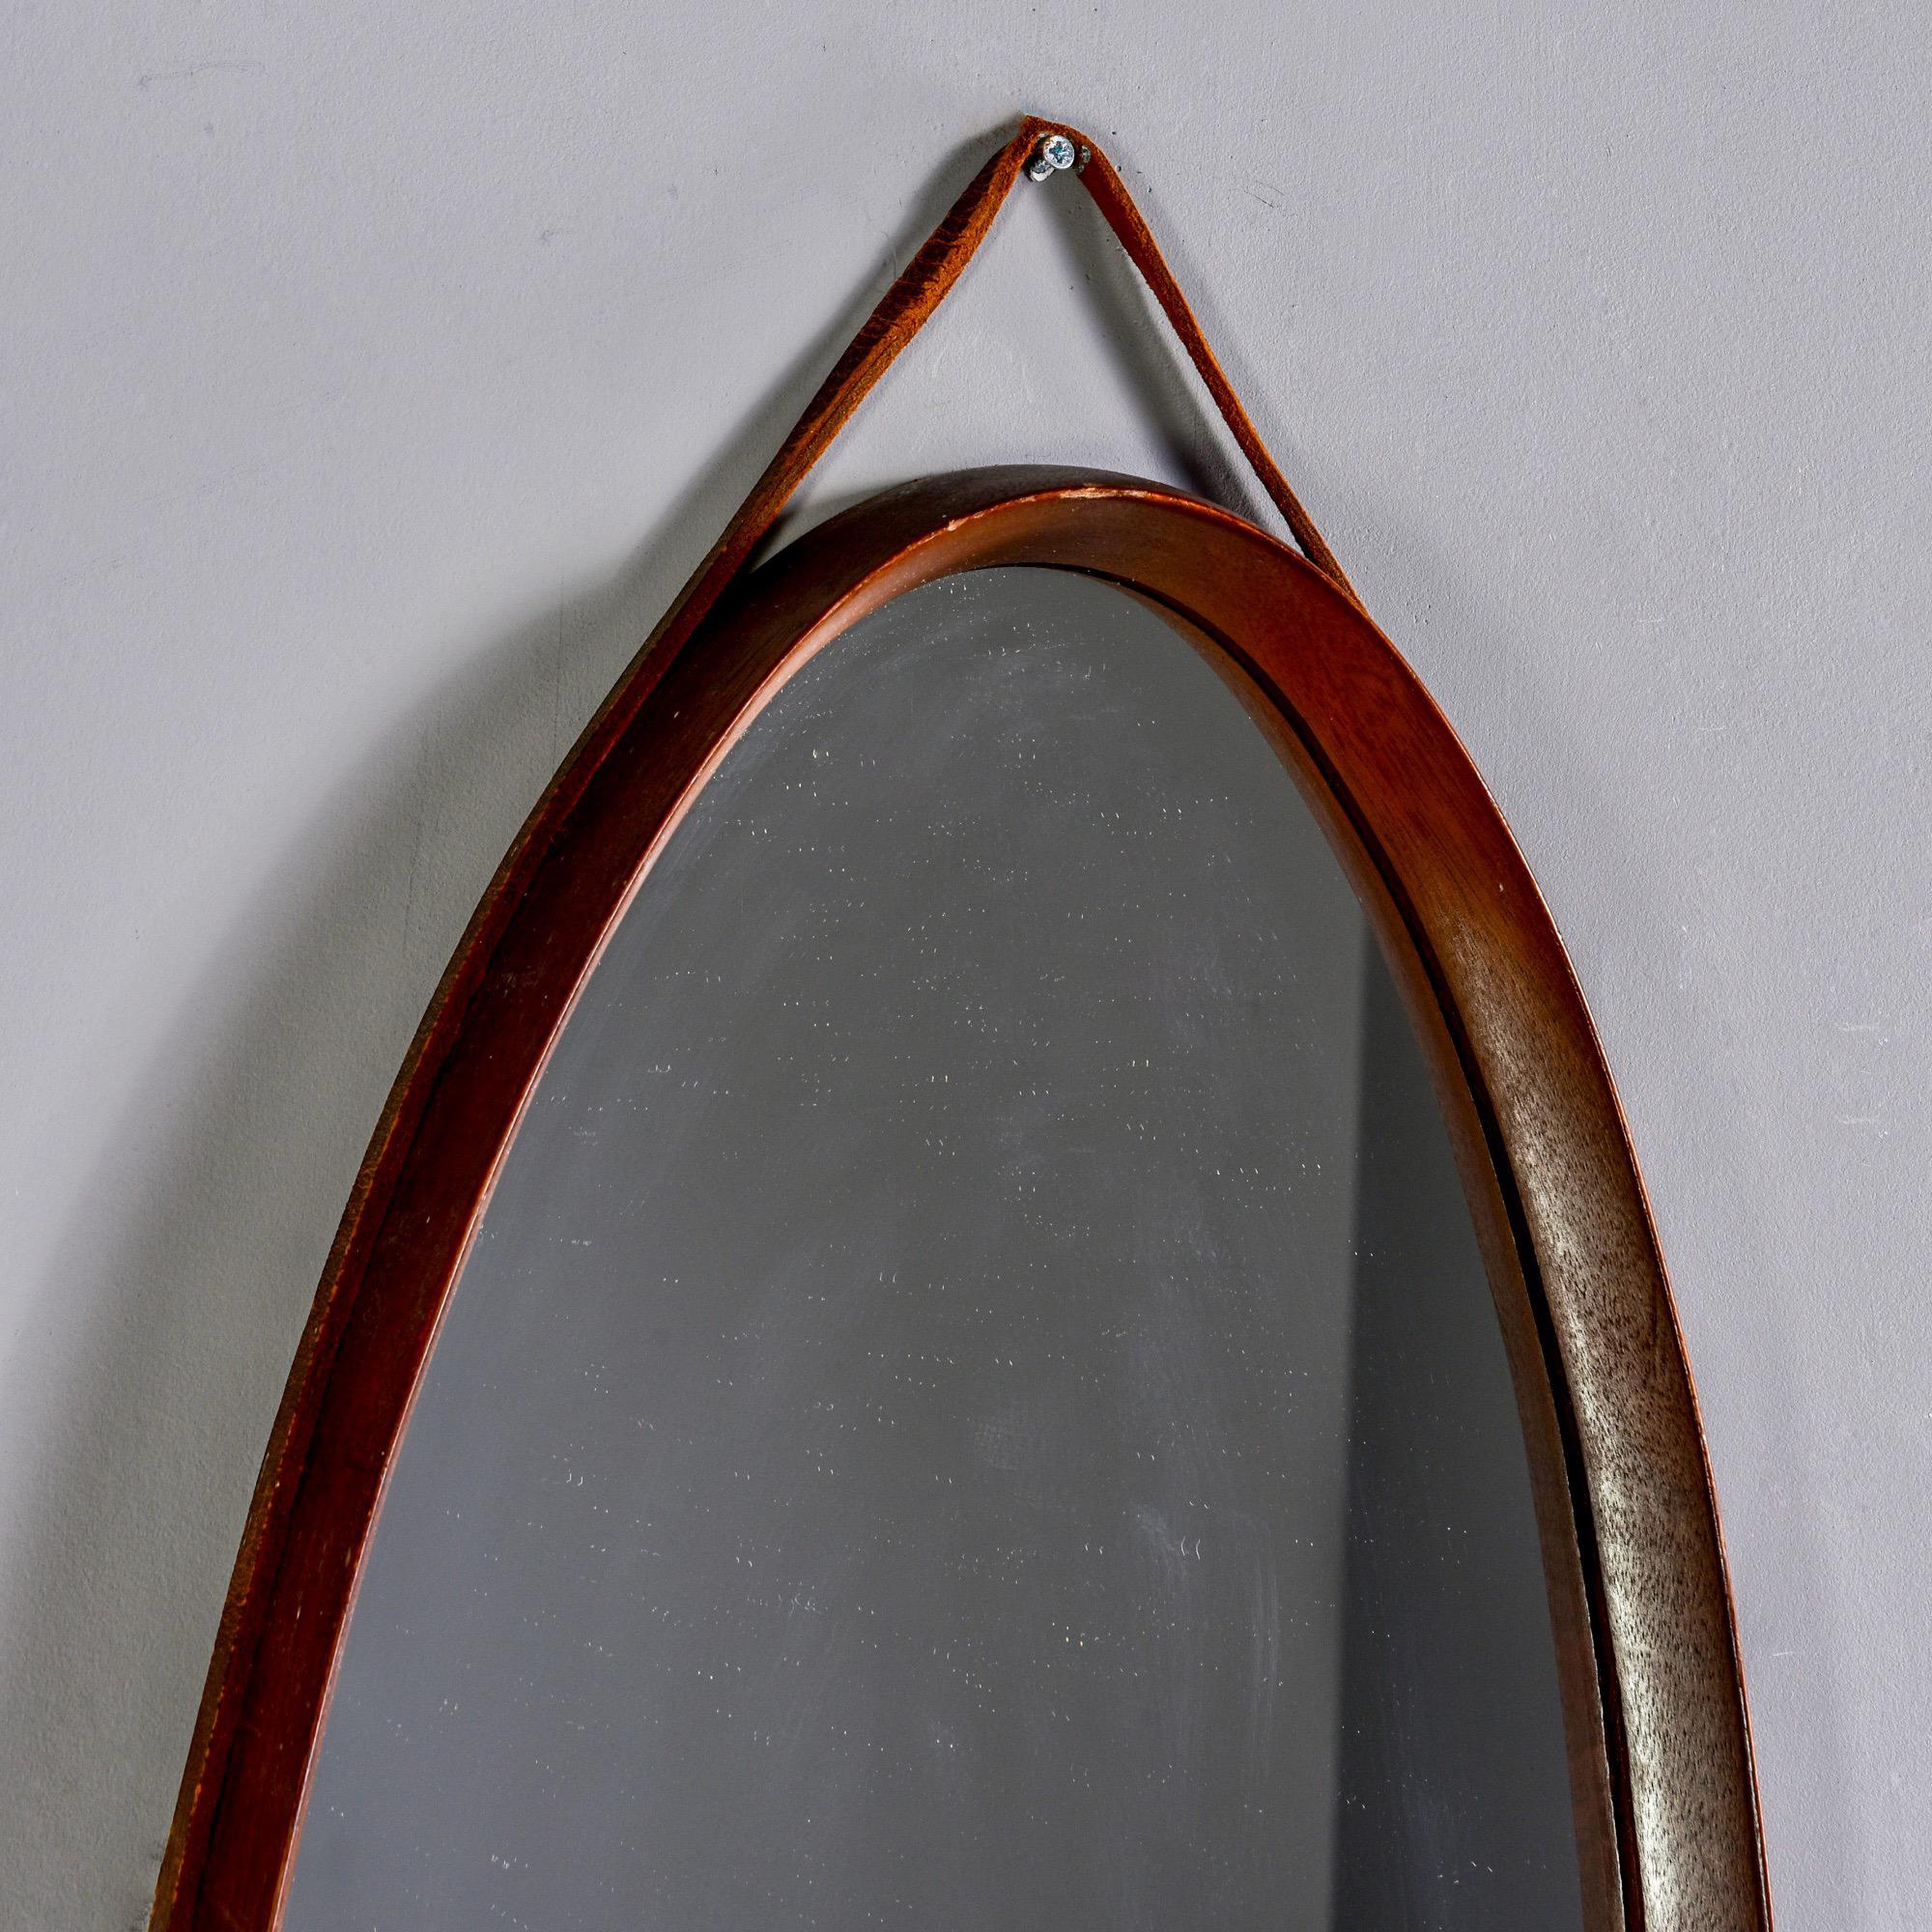 Circa 1970s Italian mirror is an elongated oval with deep set mahogany frame and leather hanging strap. Unknown maker.